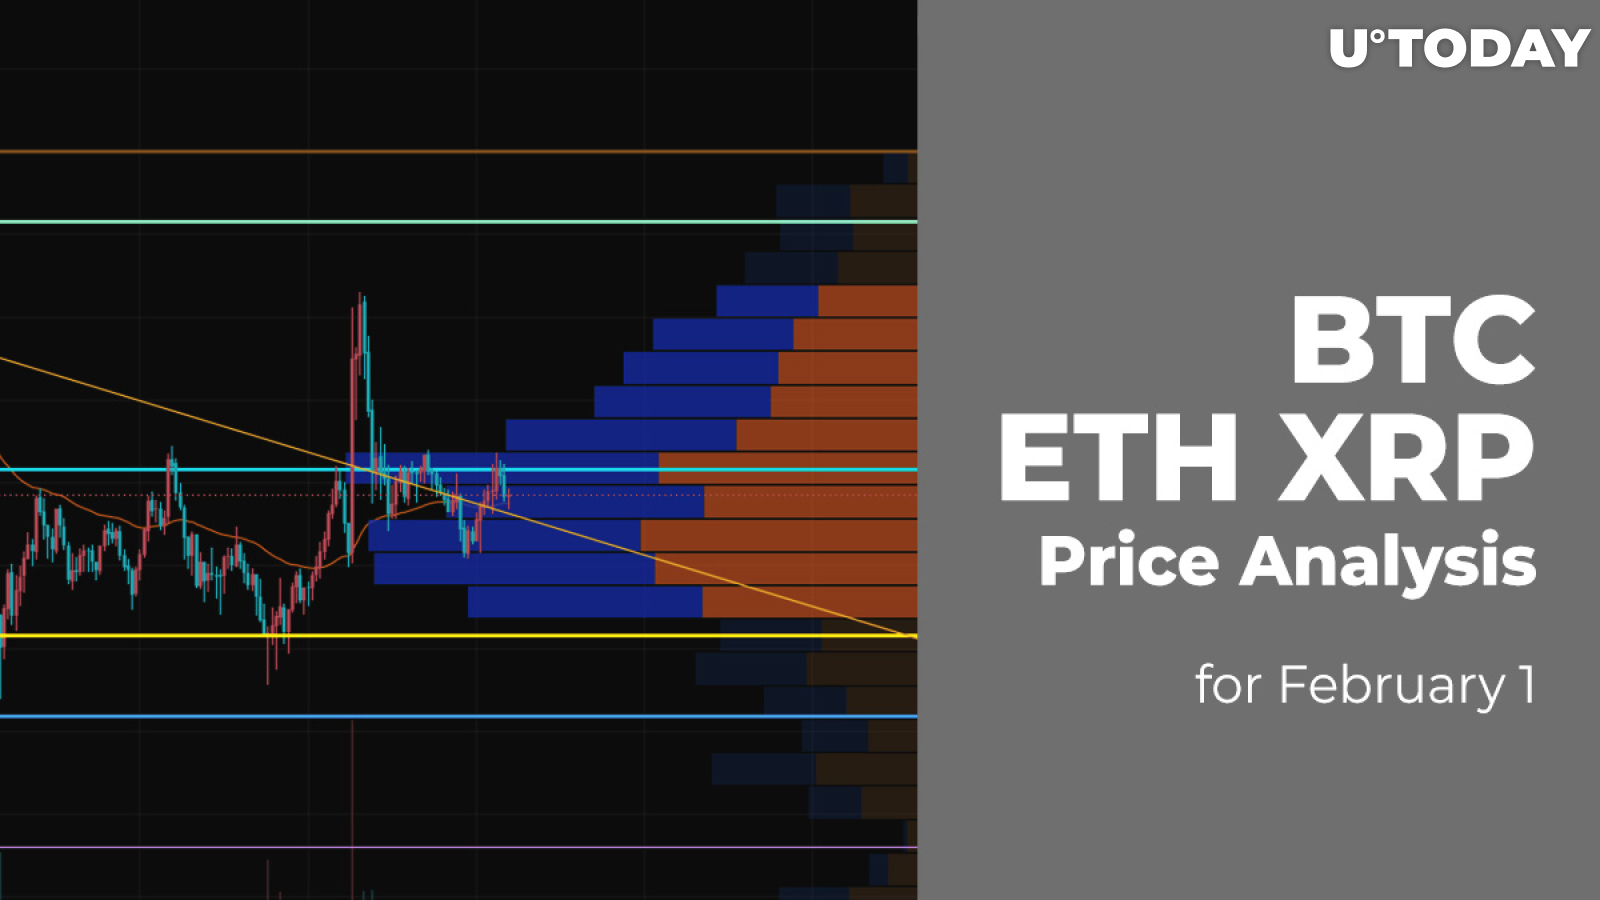 BTC, ETH and XRP Price Analysis for February 1